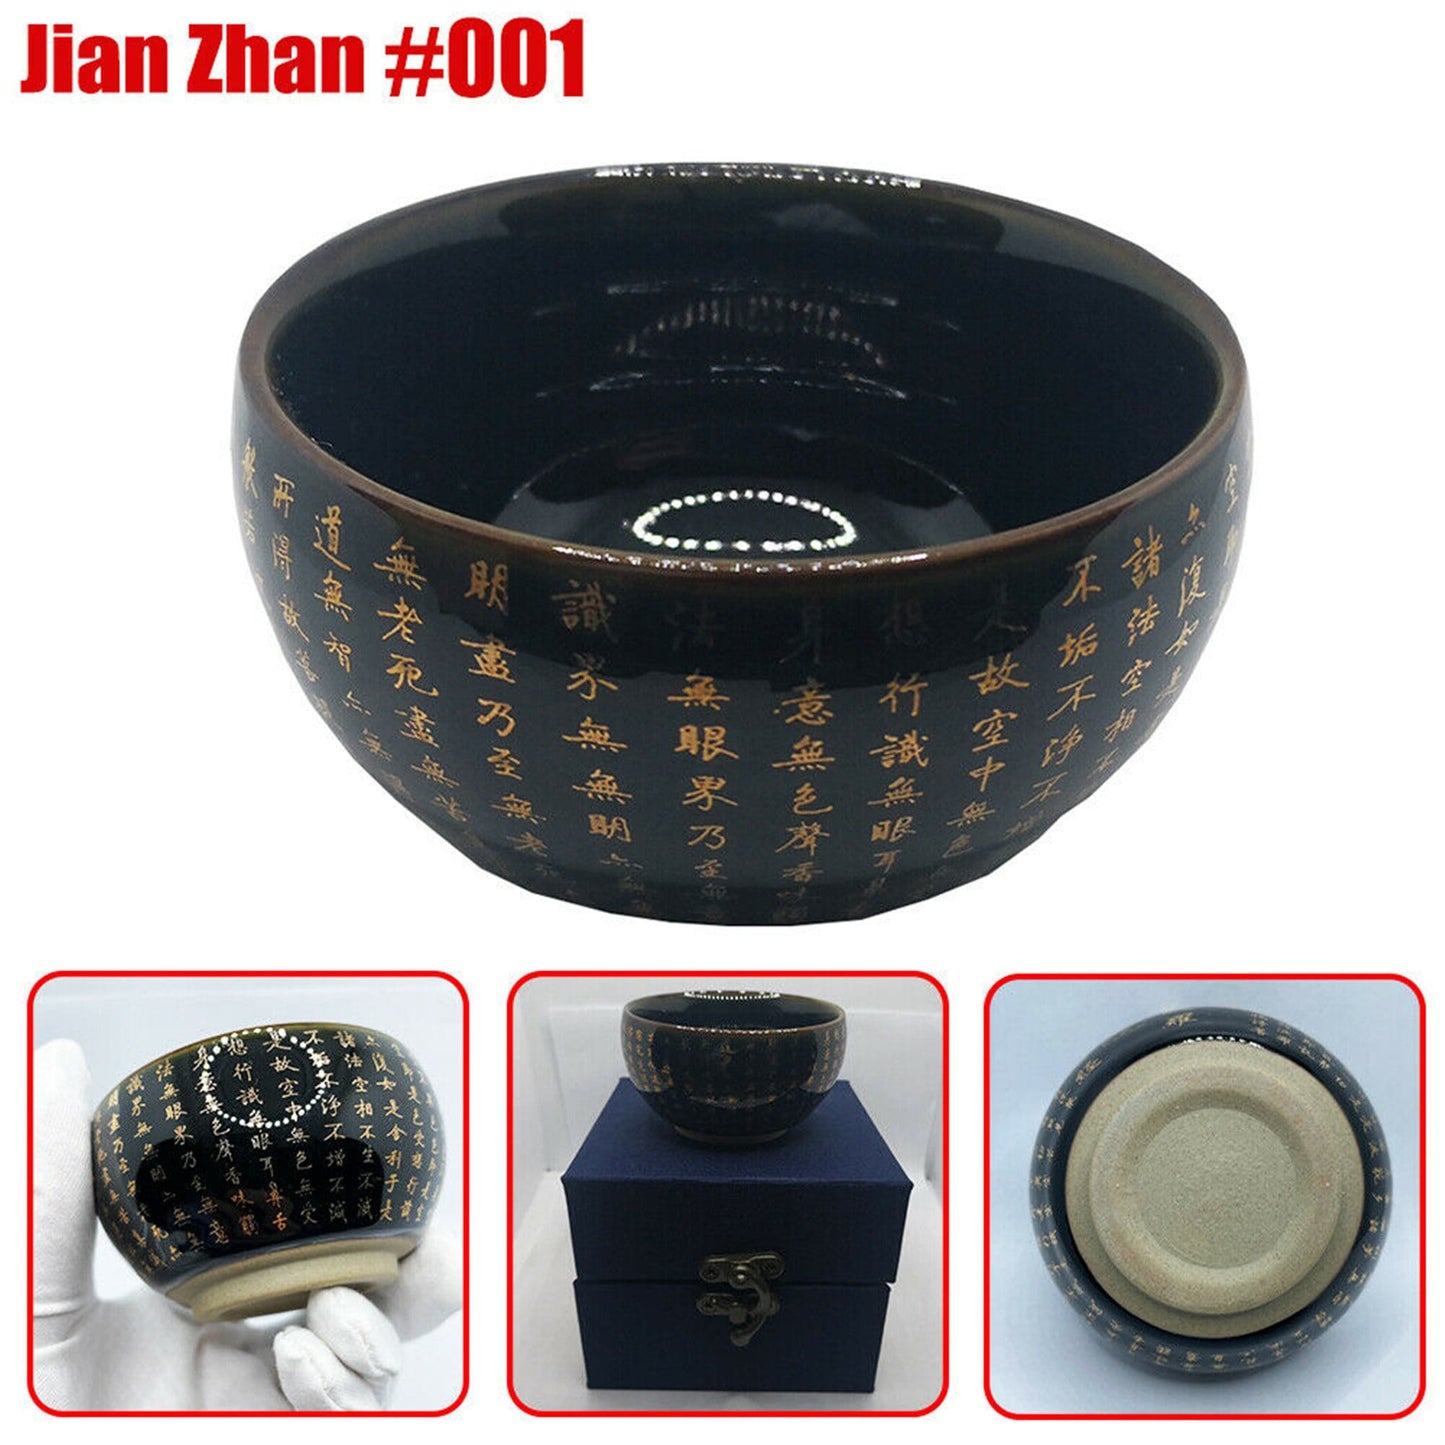 JianZhan Chinese Tea Cups  Handcrafted Tenmoku Tea Cup Ceramic Teacup Mug matcha bowl Crafts Collection|Father's Day Gift